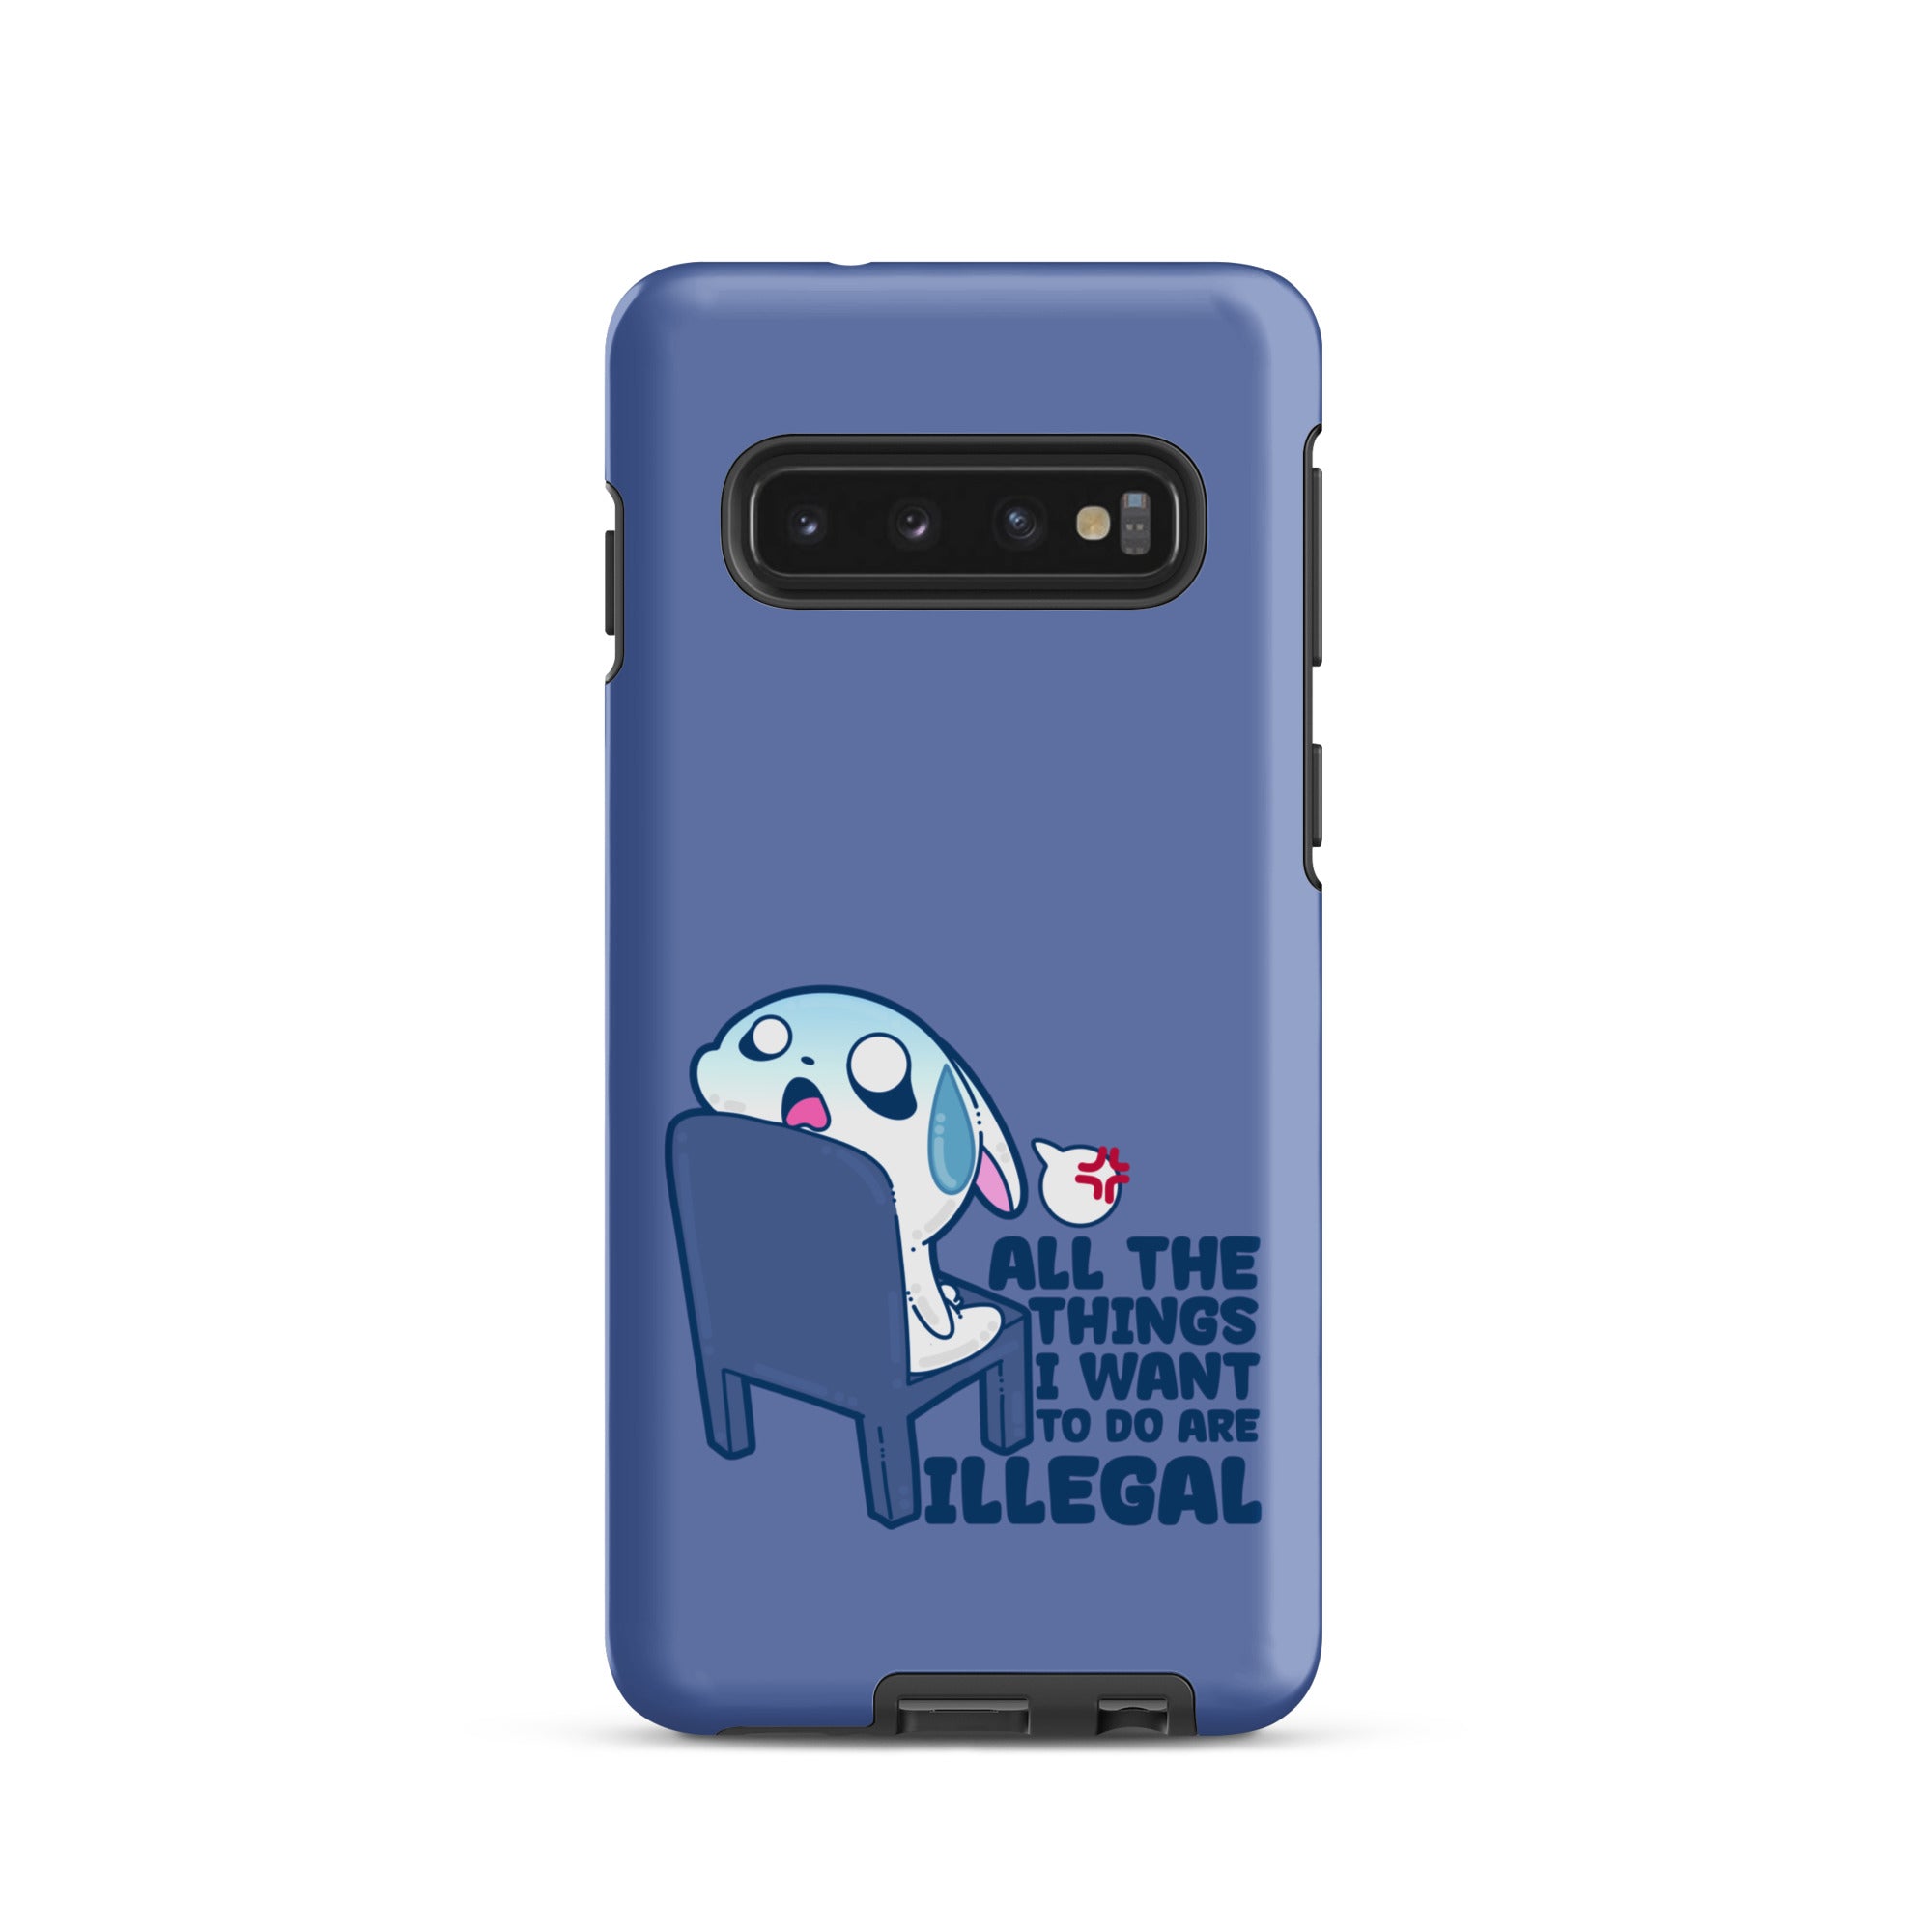 ALL THE THINGS - Tough case for Samsung®